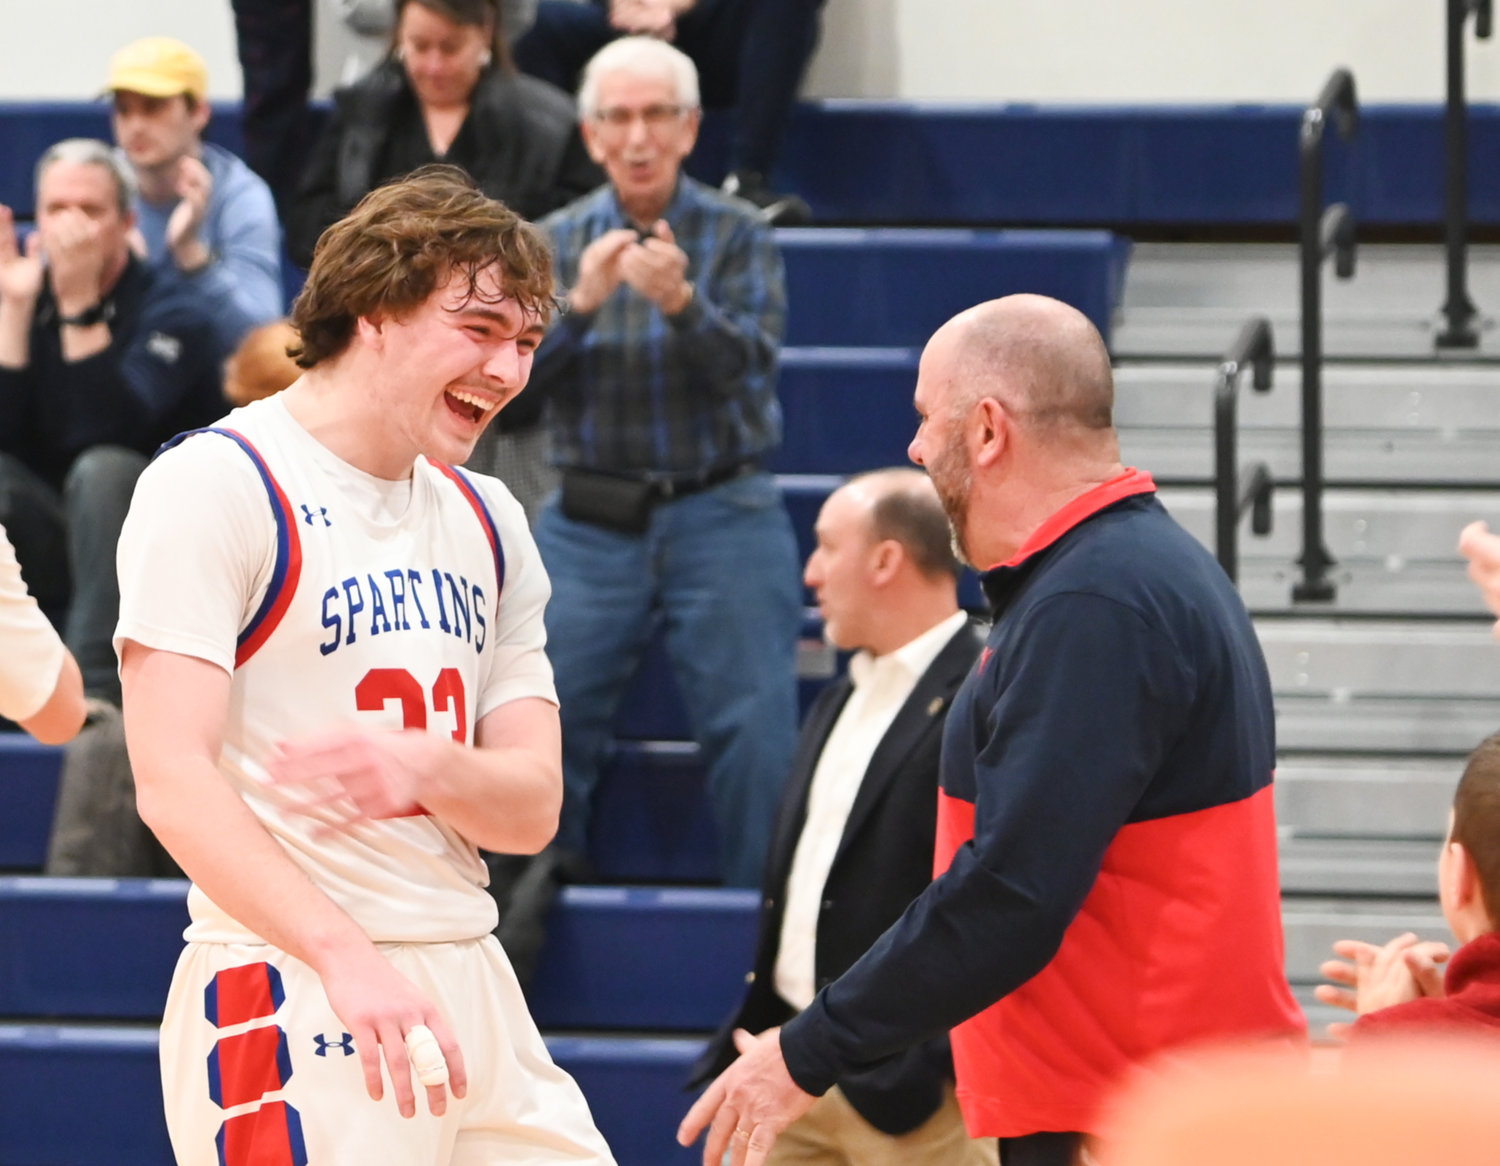 New Hartford senior Zack Philipkoski celebrates with coach John Randall following the team's 69-60 victory over Troy on Wednesday at Liverpool High School. New Hartford advances to play in a regional final on Saturday at SUNY Potsdam.